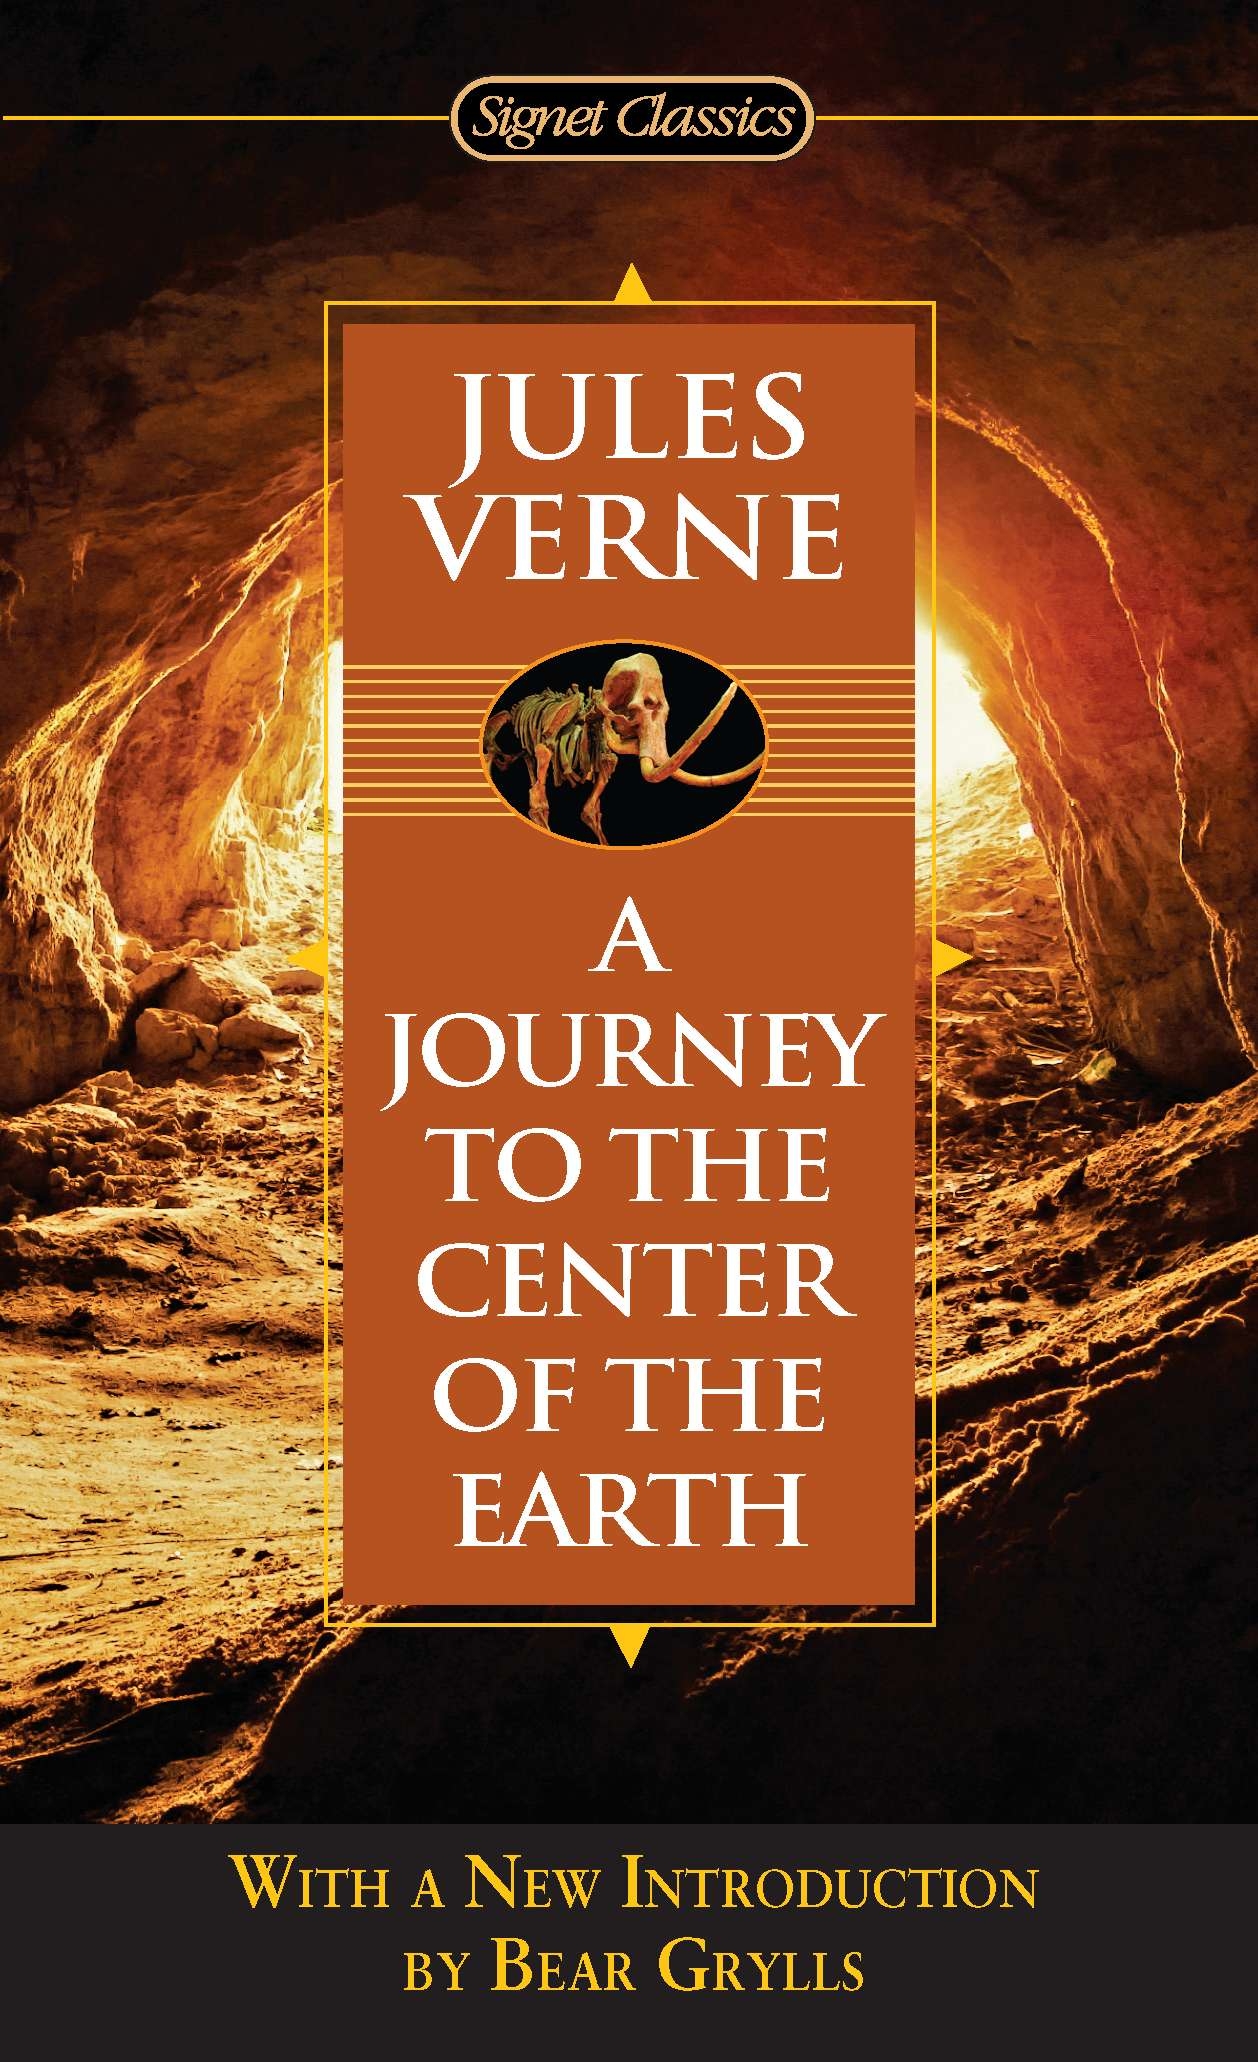 jules verne journey to the center of the earth